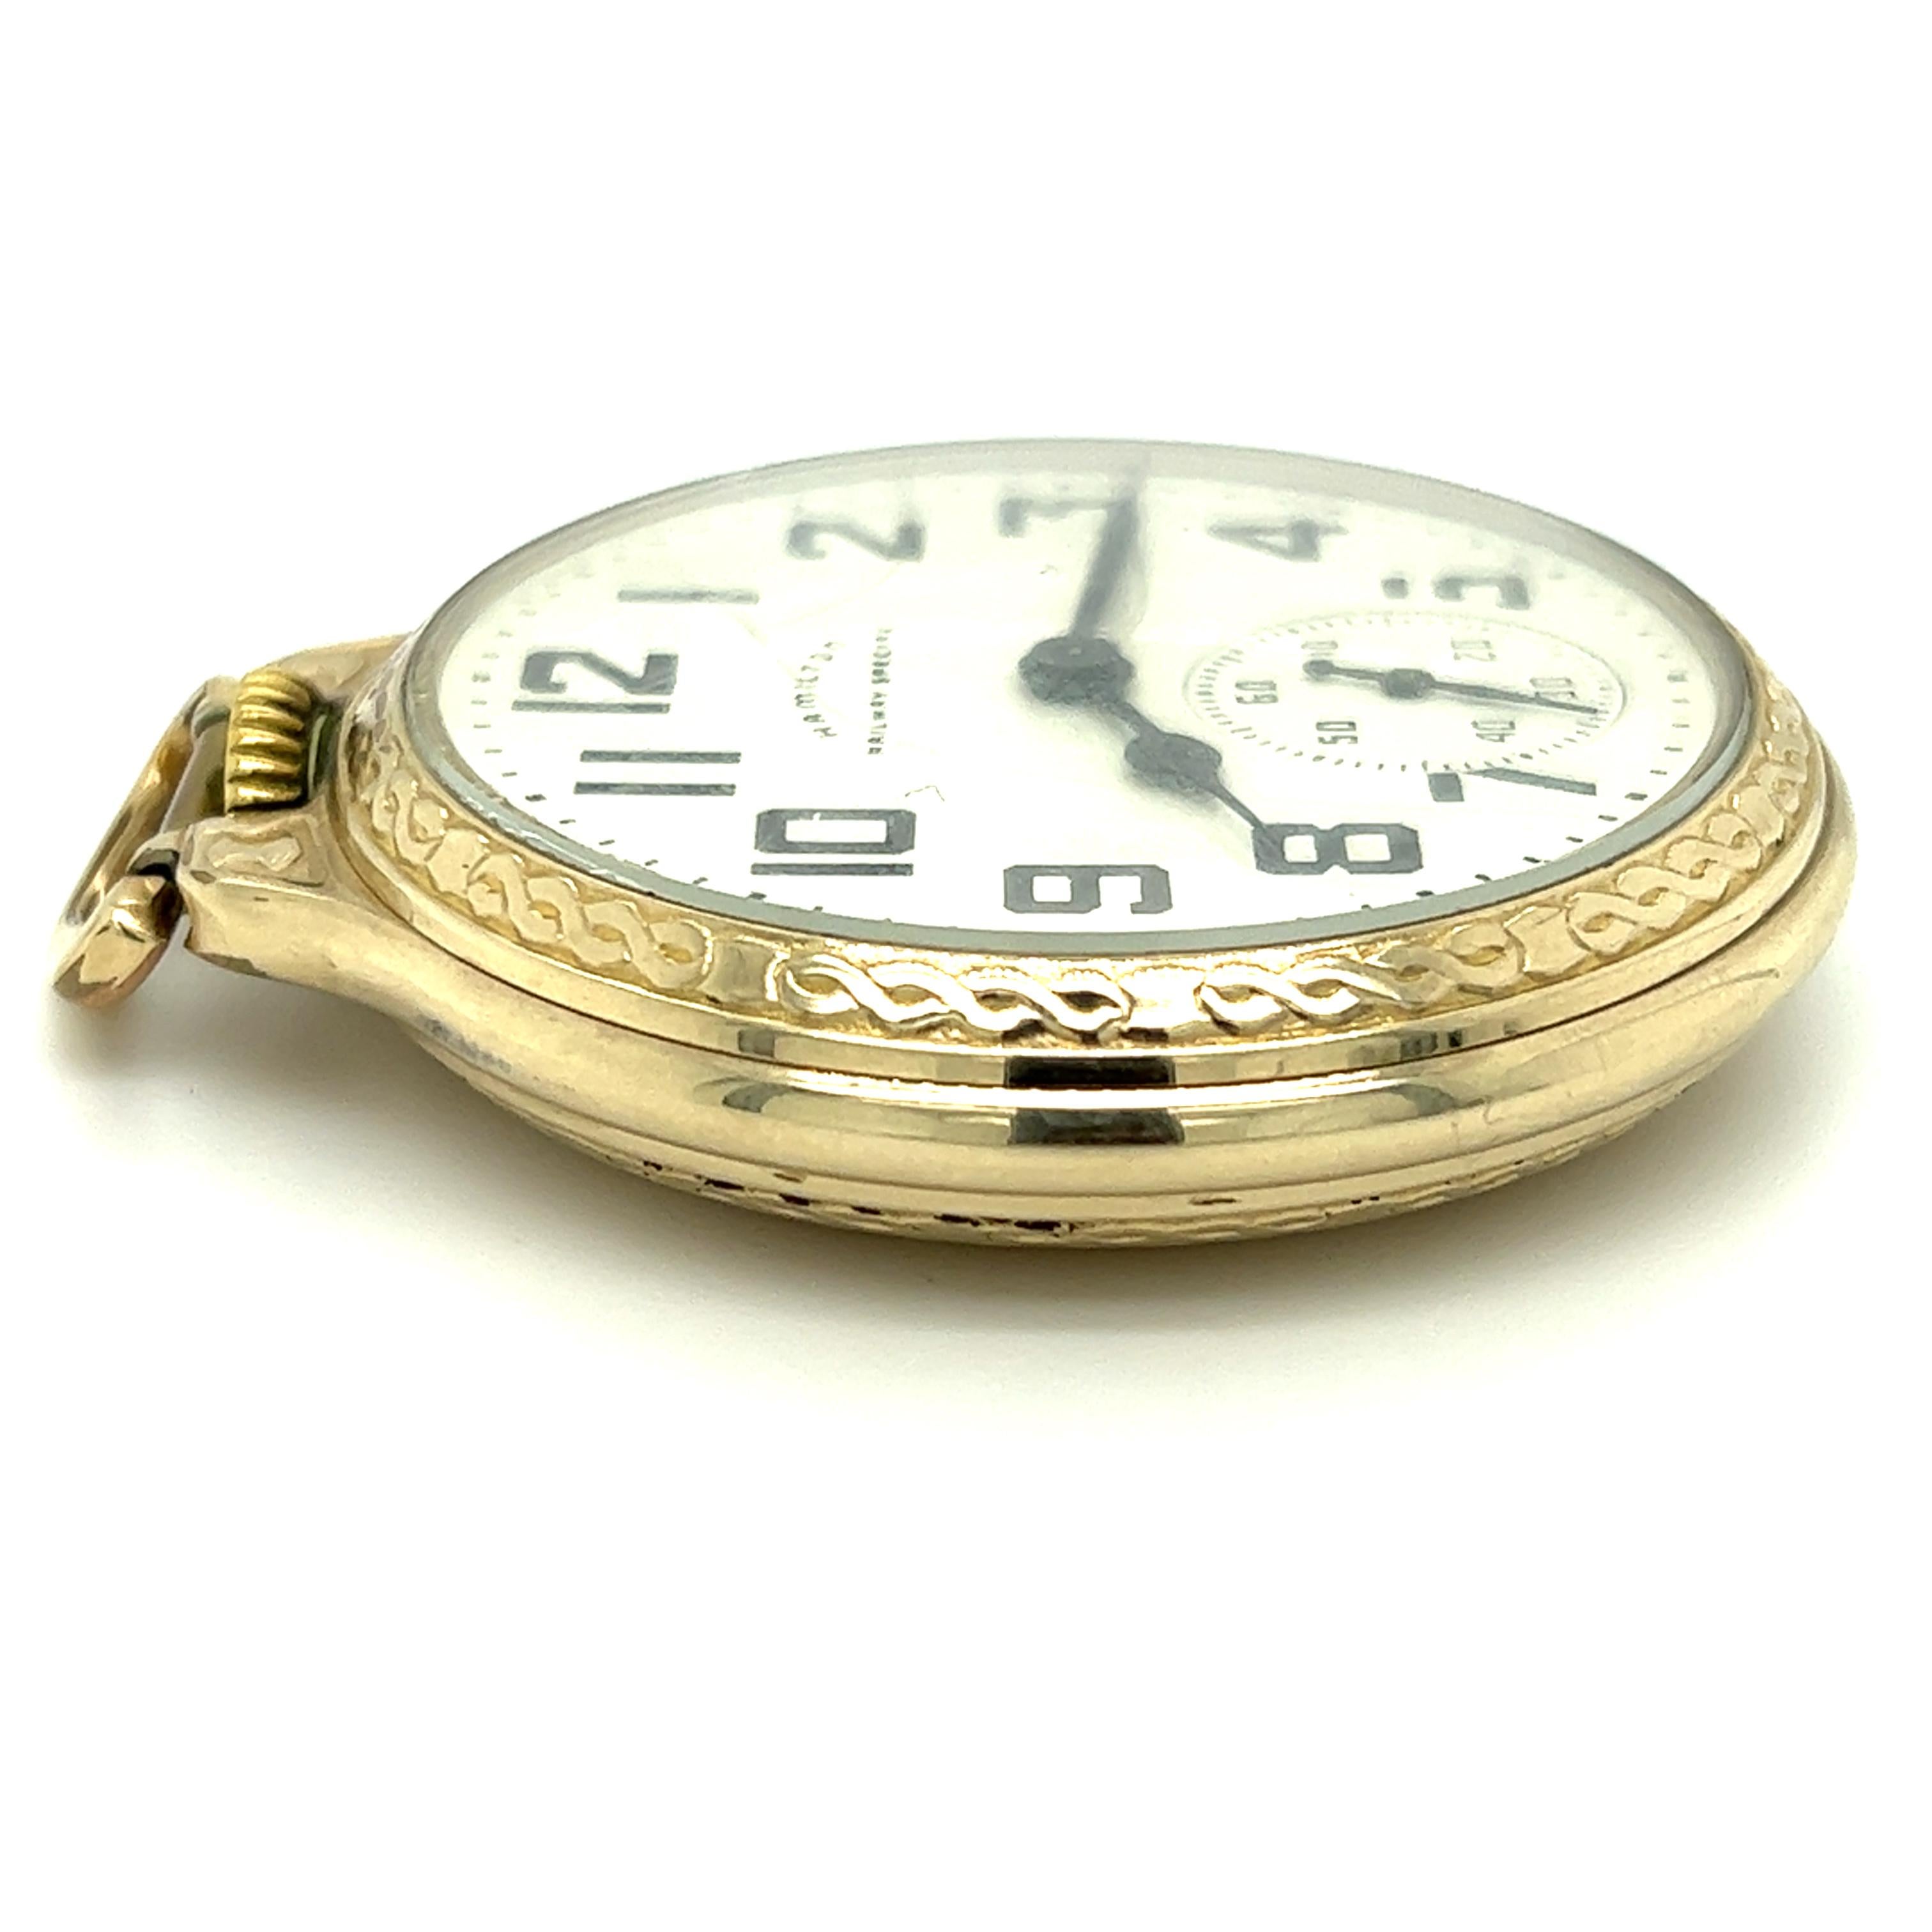 One 10 karat yellow gold filled 16 size Hamilton Watch Co. Hamilton Railway Special open face pocket watch.  The movement is manual wide, lever set, signed 992B, has 21 jewels, with serial number C454351. Production date is 1957. The watch is